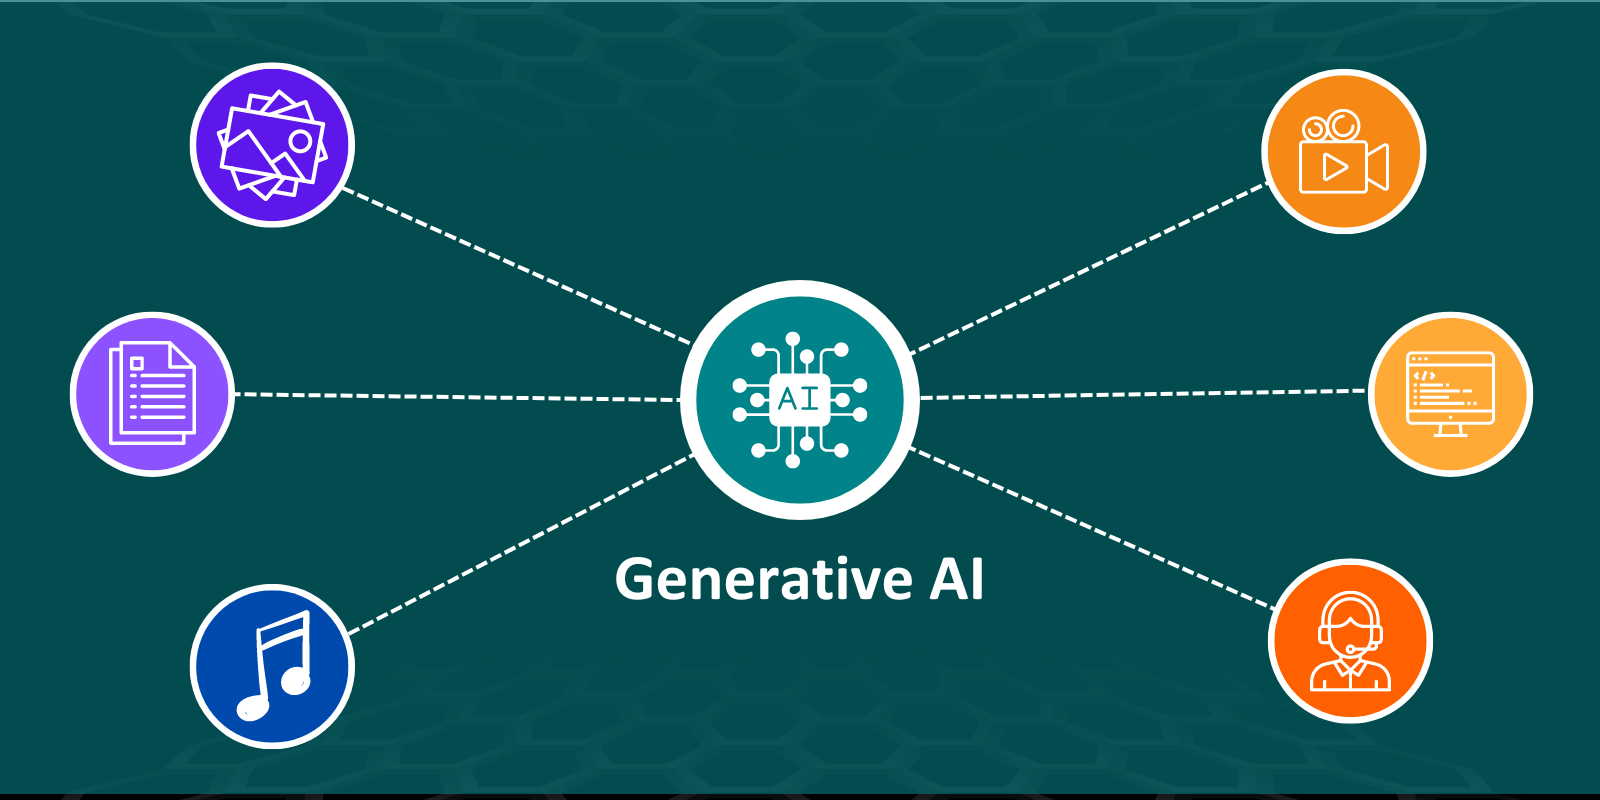 Generative AI Applications: Text, Customer Service, Music, and Code Generation, etc.